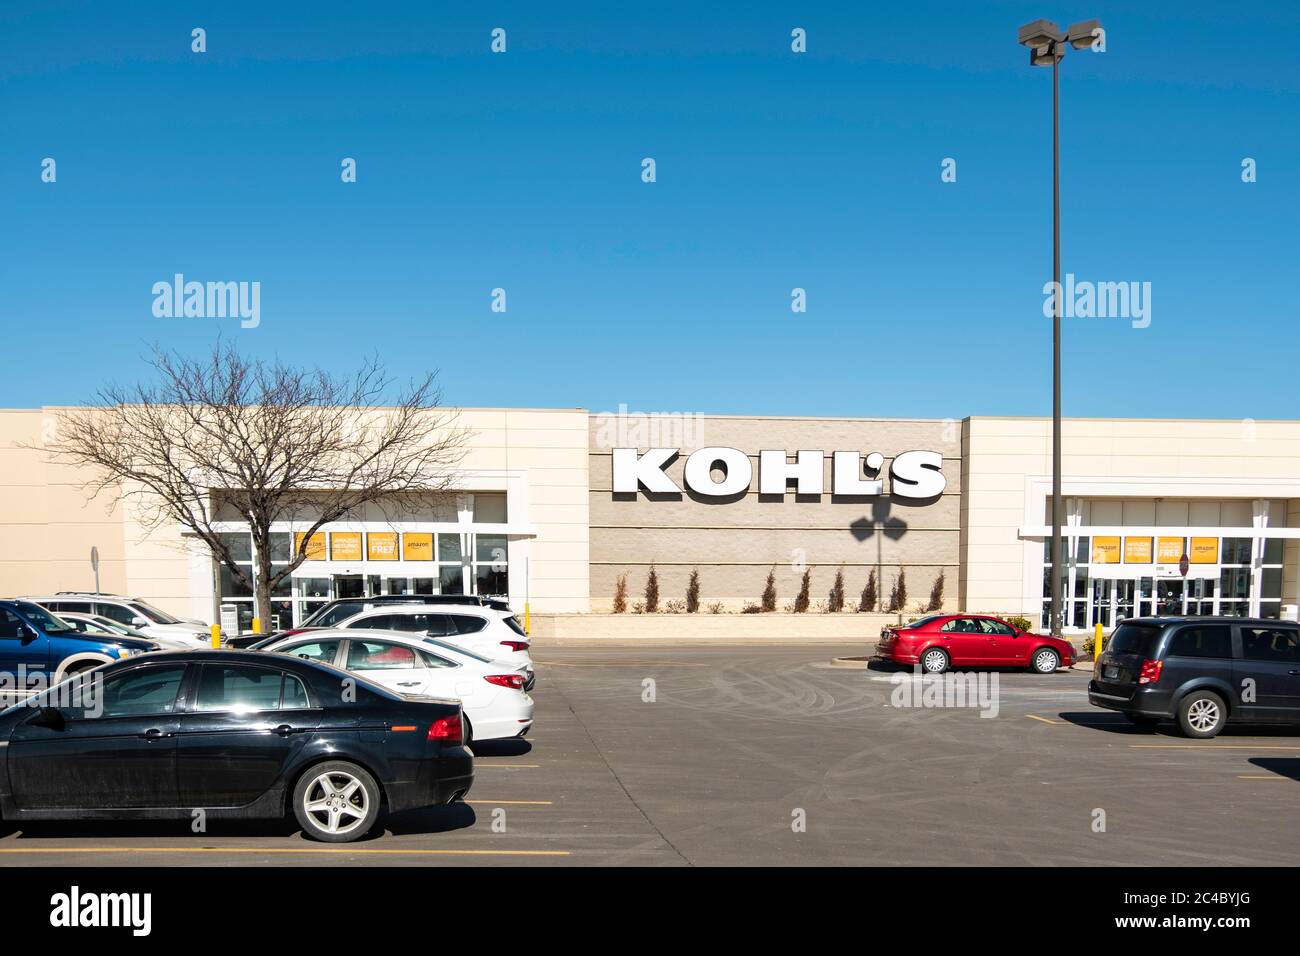 Exterior storefront and entrance of Kohl's department store in Wichita, Kansas. Stock Photo